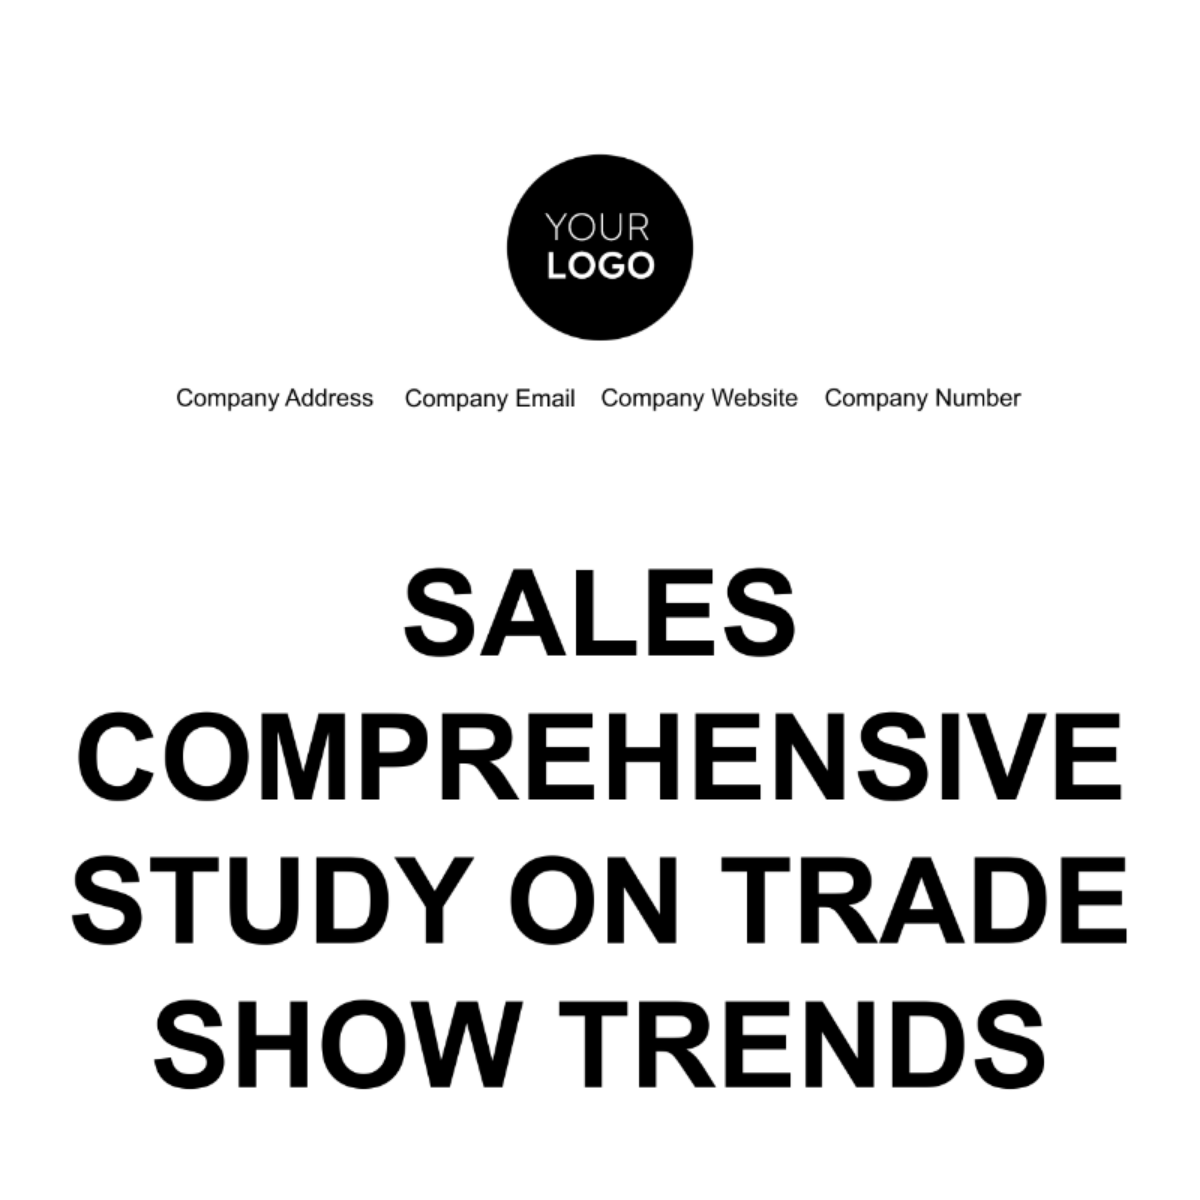 Free Sales Comprehensive Study on Trade Show Trends Template